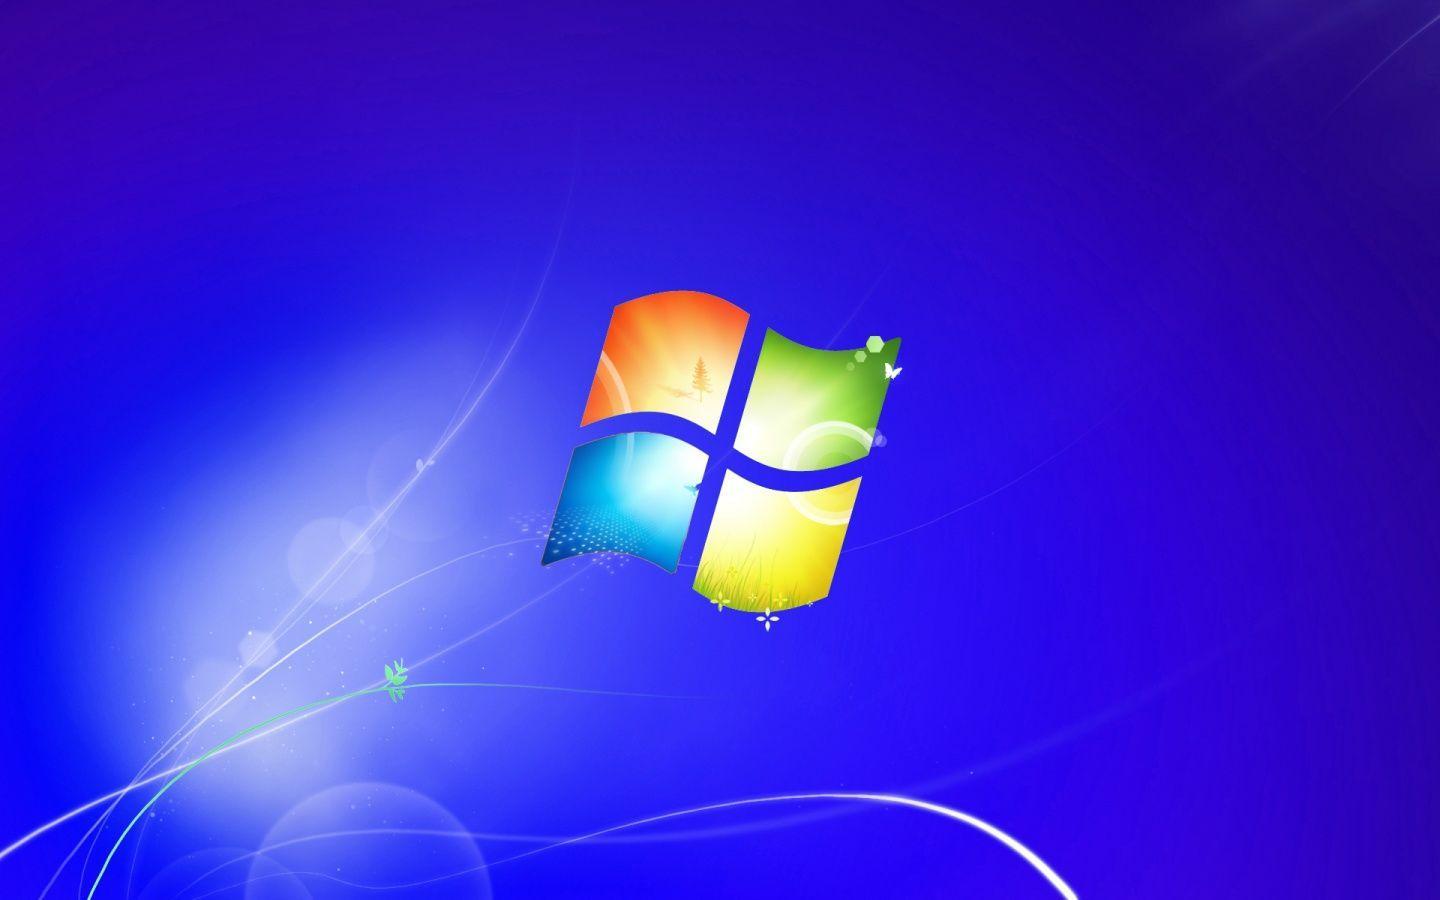 Cool Windows 7 Wallpapers